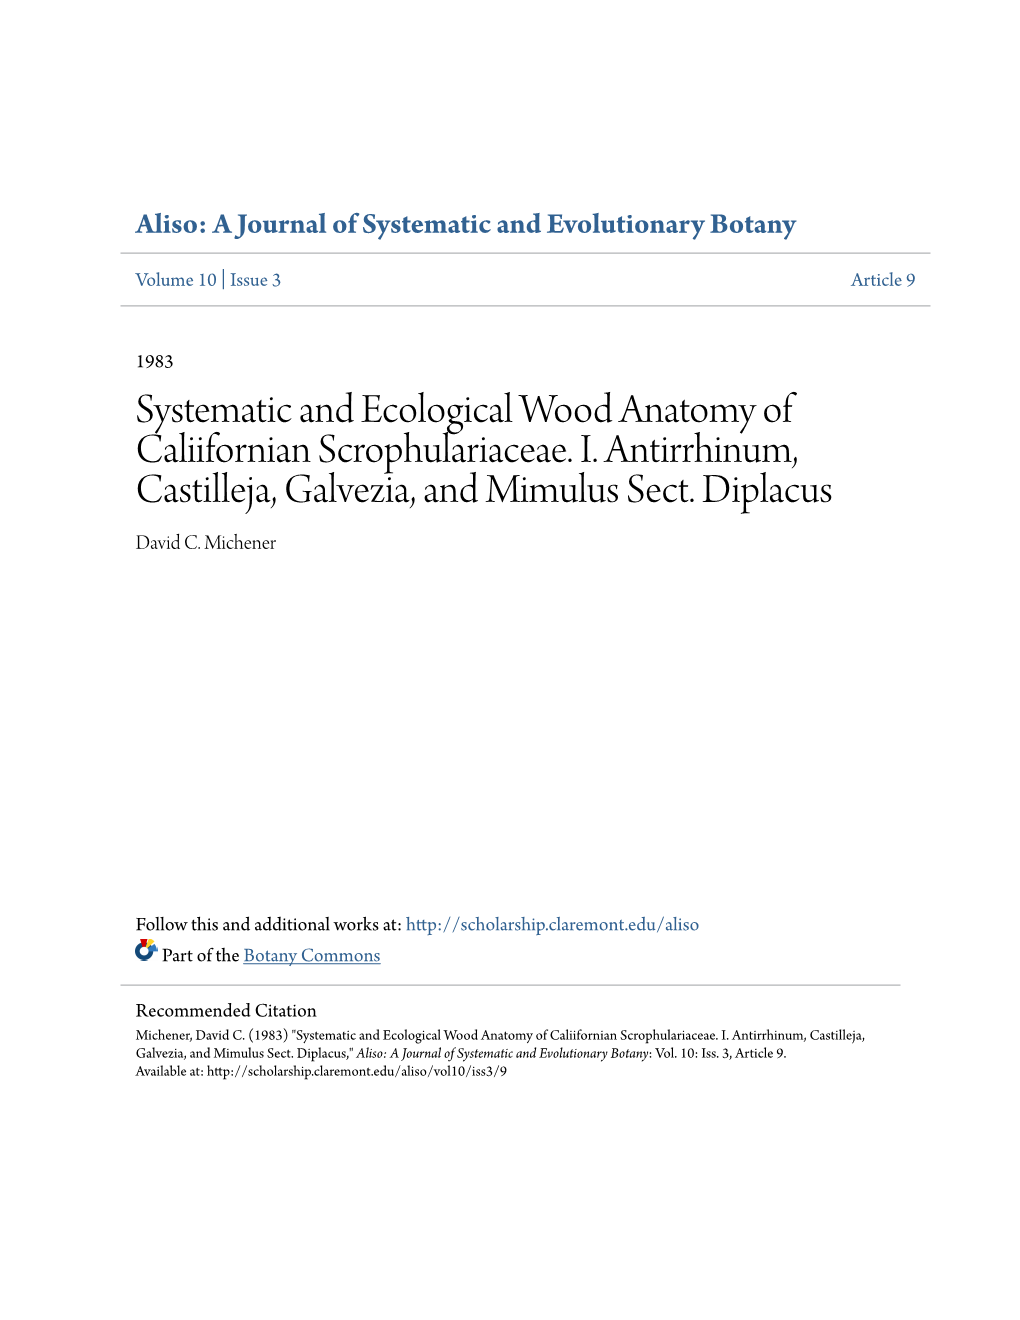 Systematic and Ecological Wood Anatomy of Caliifornian Scrophulariaceae